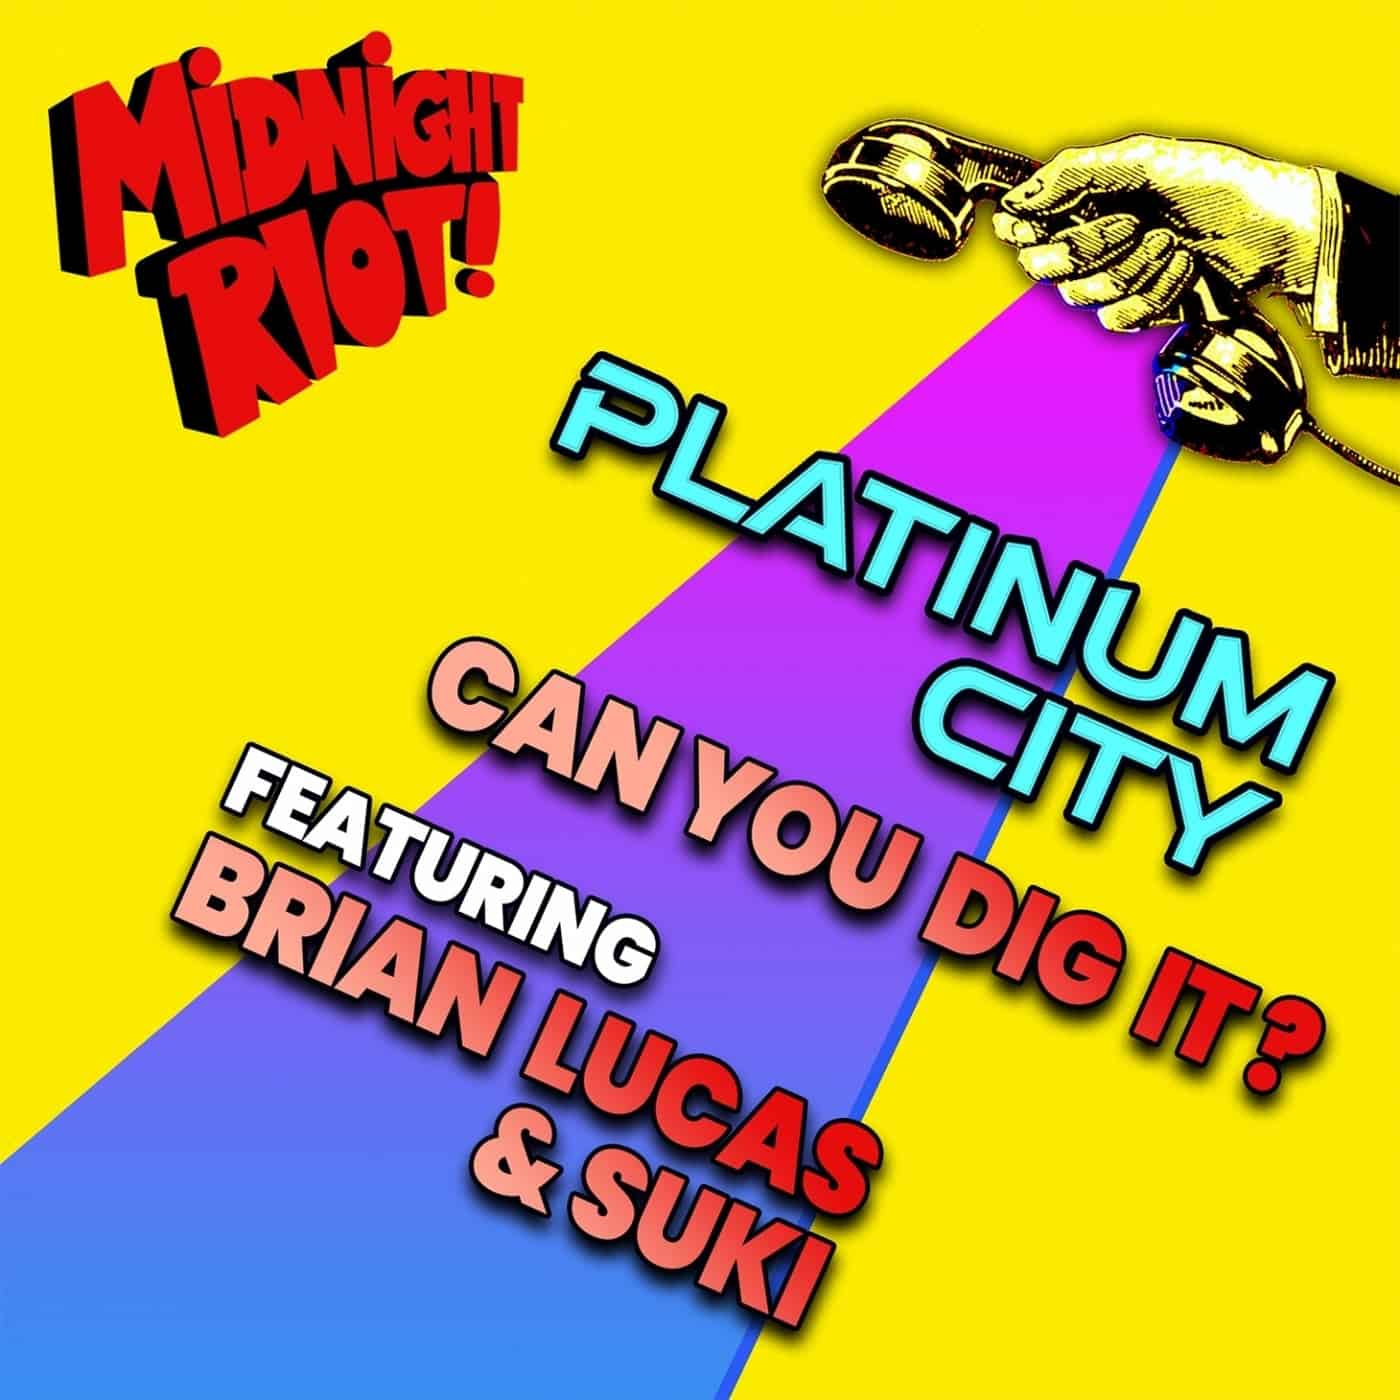 image cover: Brian Lucas, Platinum City, Suki Soul - Can You Dig It? (Extended Mix) / MIDRIOTD377